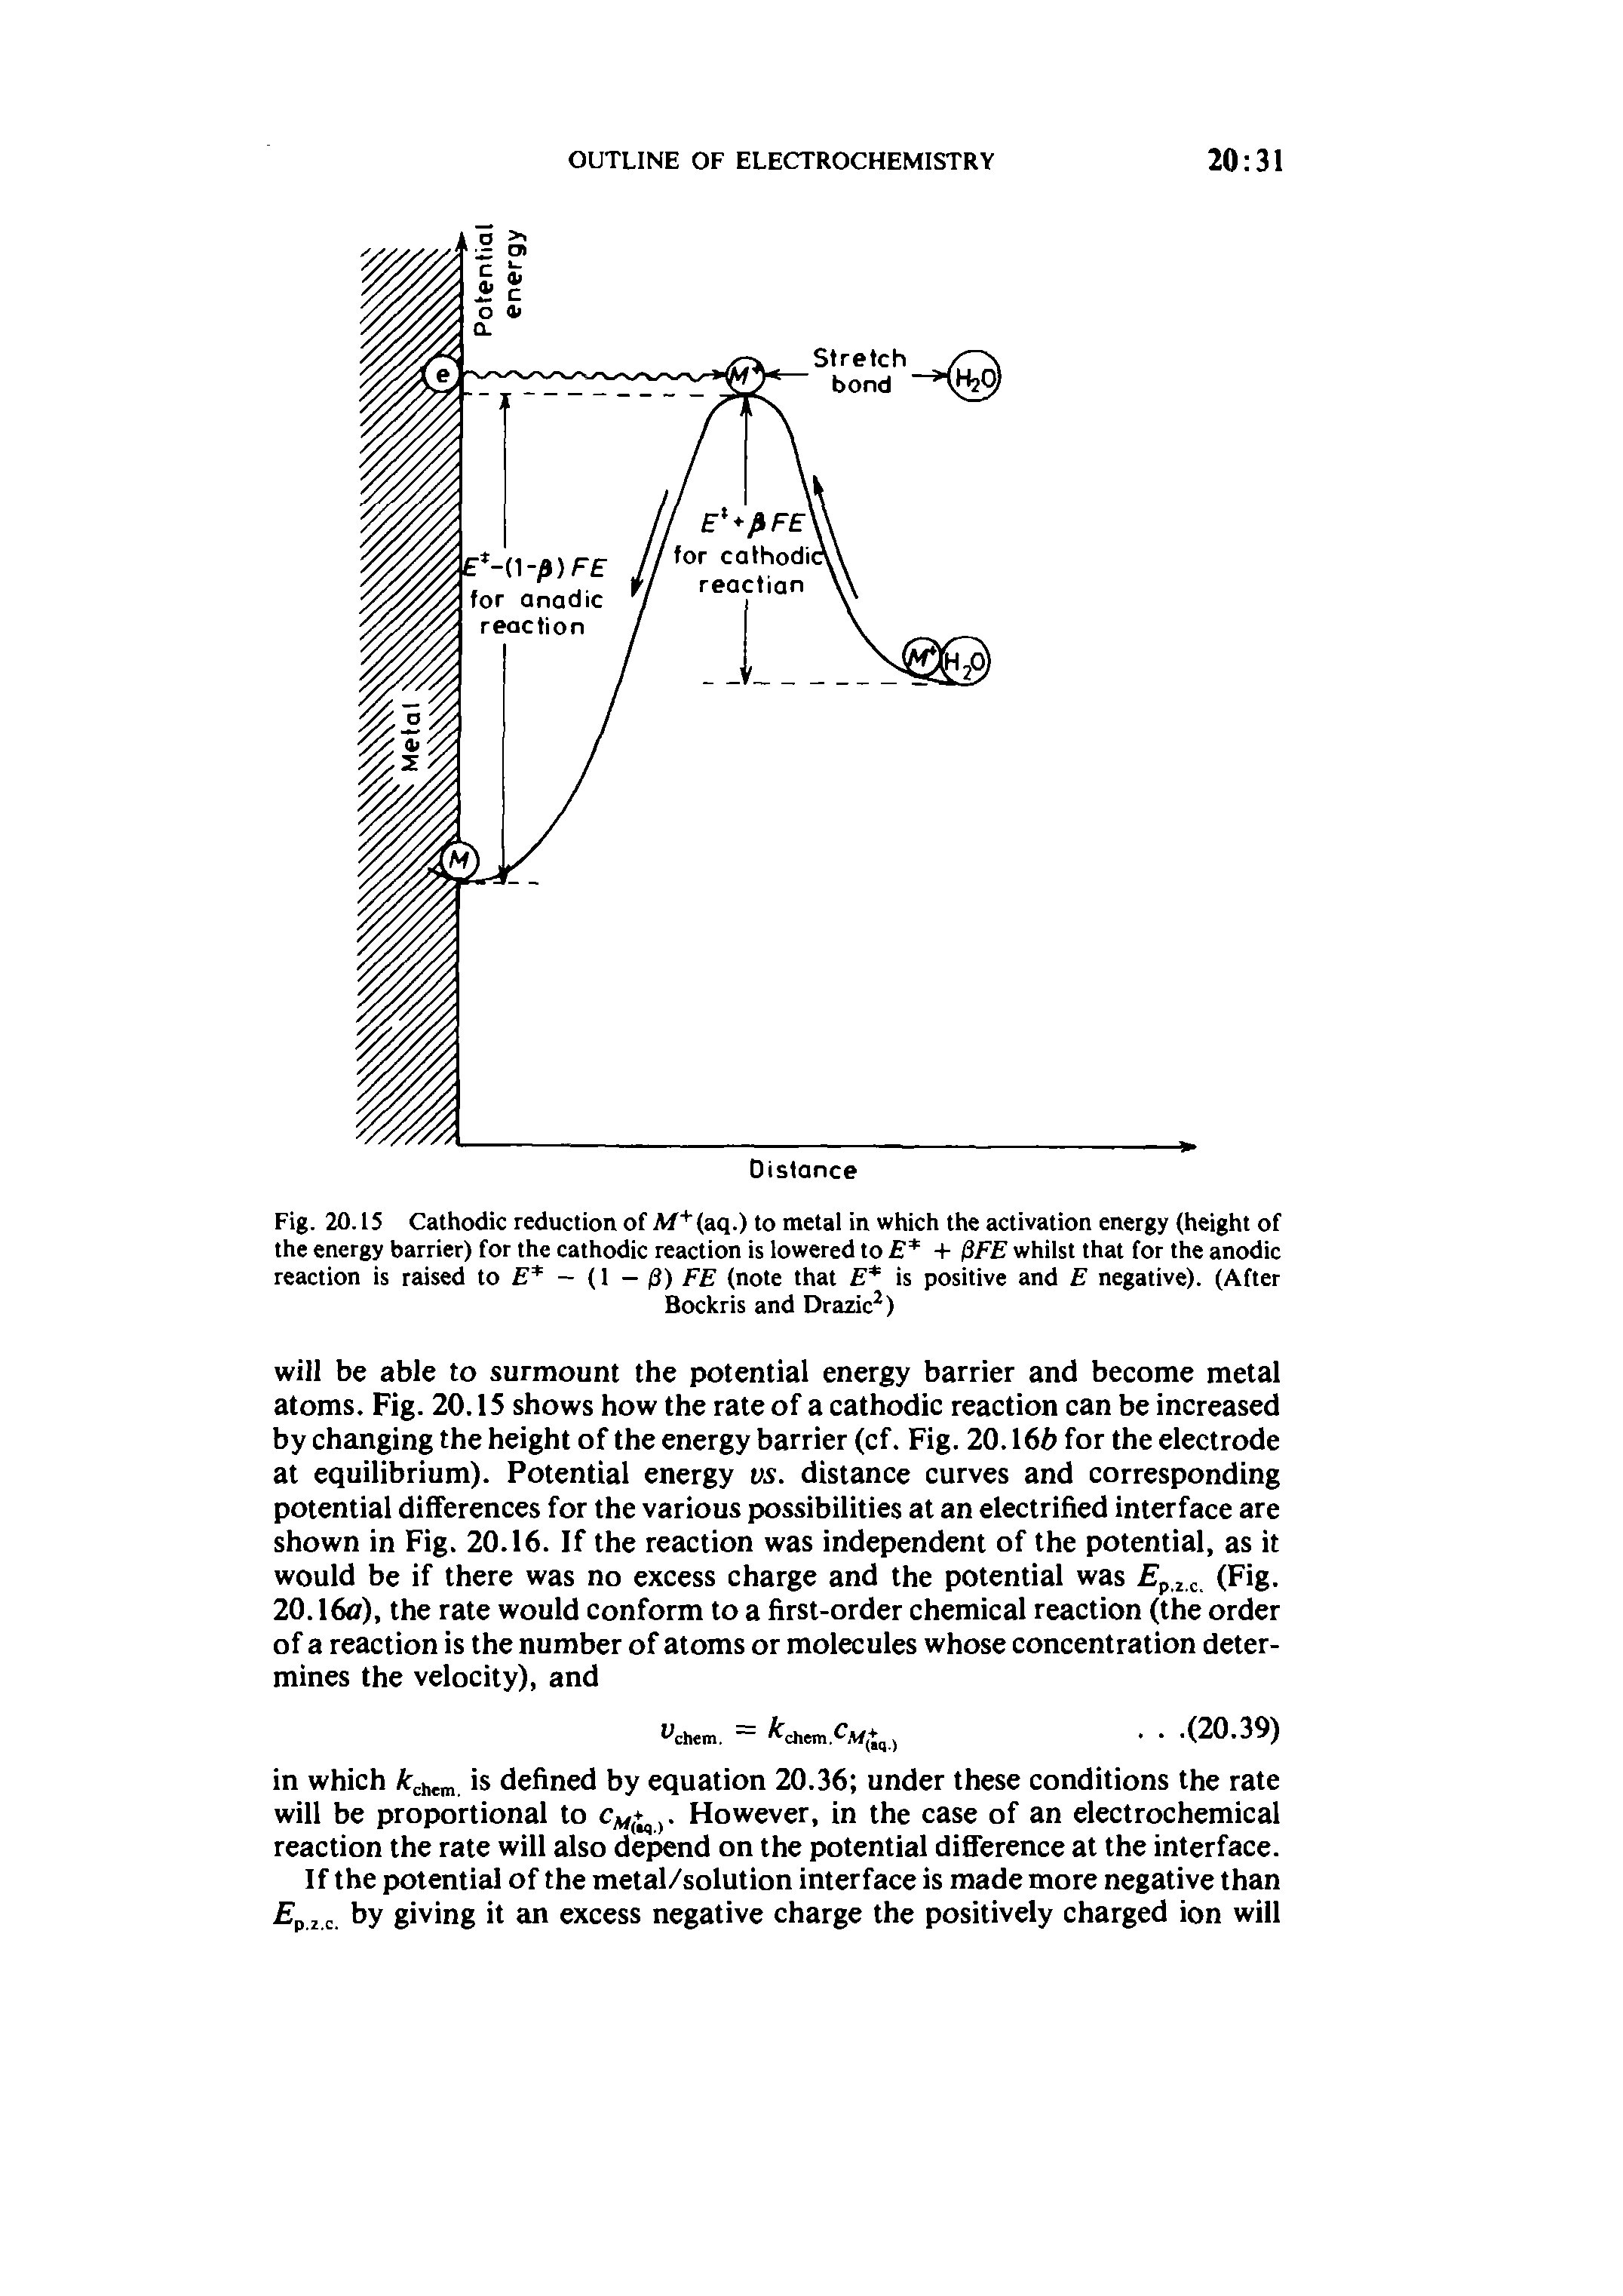 Fig. 20.15 Cathodic reduction of M" (aq.) to metal in which the activation energy (height of the energy barrier) for the cathodic reaction is lowered to E + 0FE whilst that for the anodic reaction is raised to — (1 — /3) FE (note that E is positive and E negative). (After...